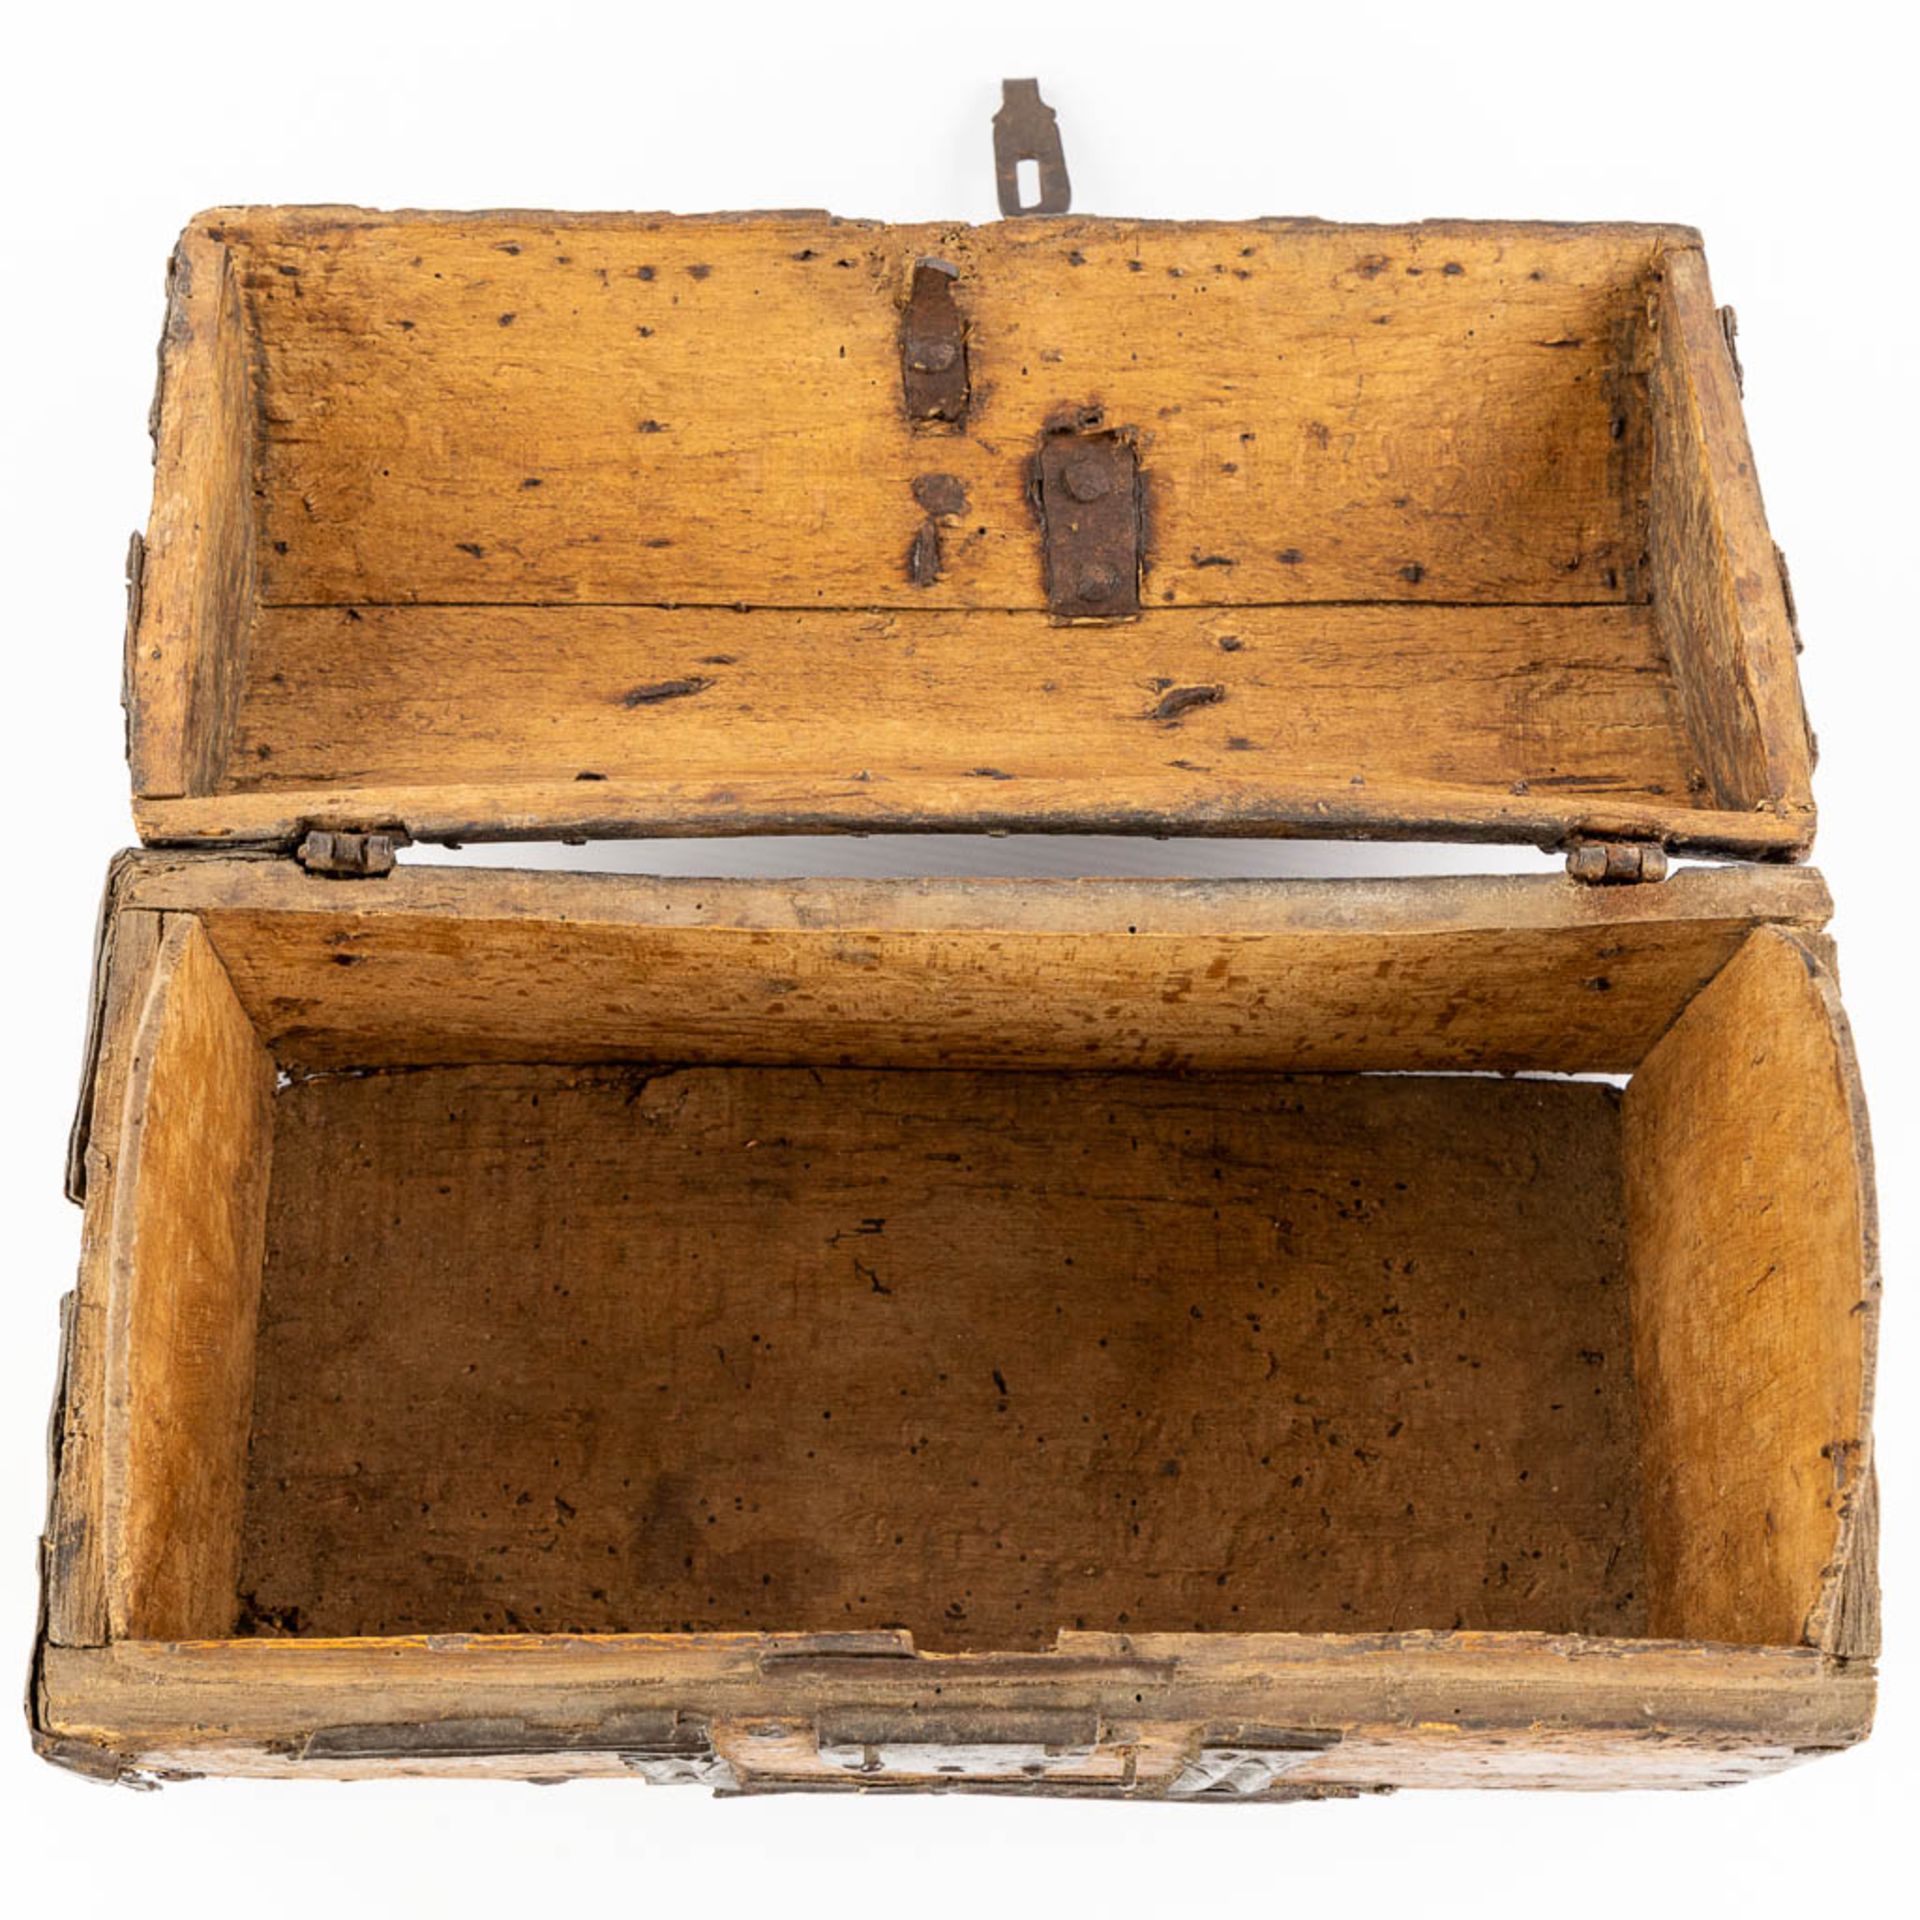 An antique money box or storage chest, wood and wrought iron, 16th/17th C. (L:20 x W:36 x H:22 cm) - Image 10 of 14